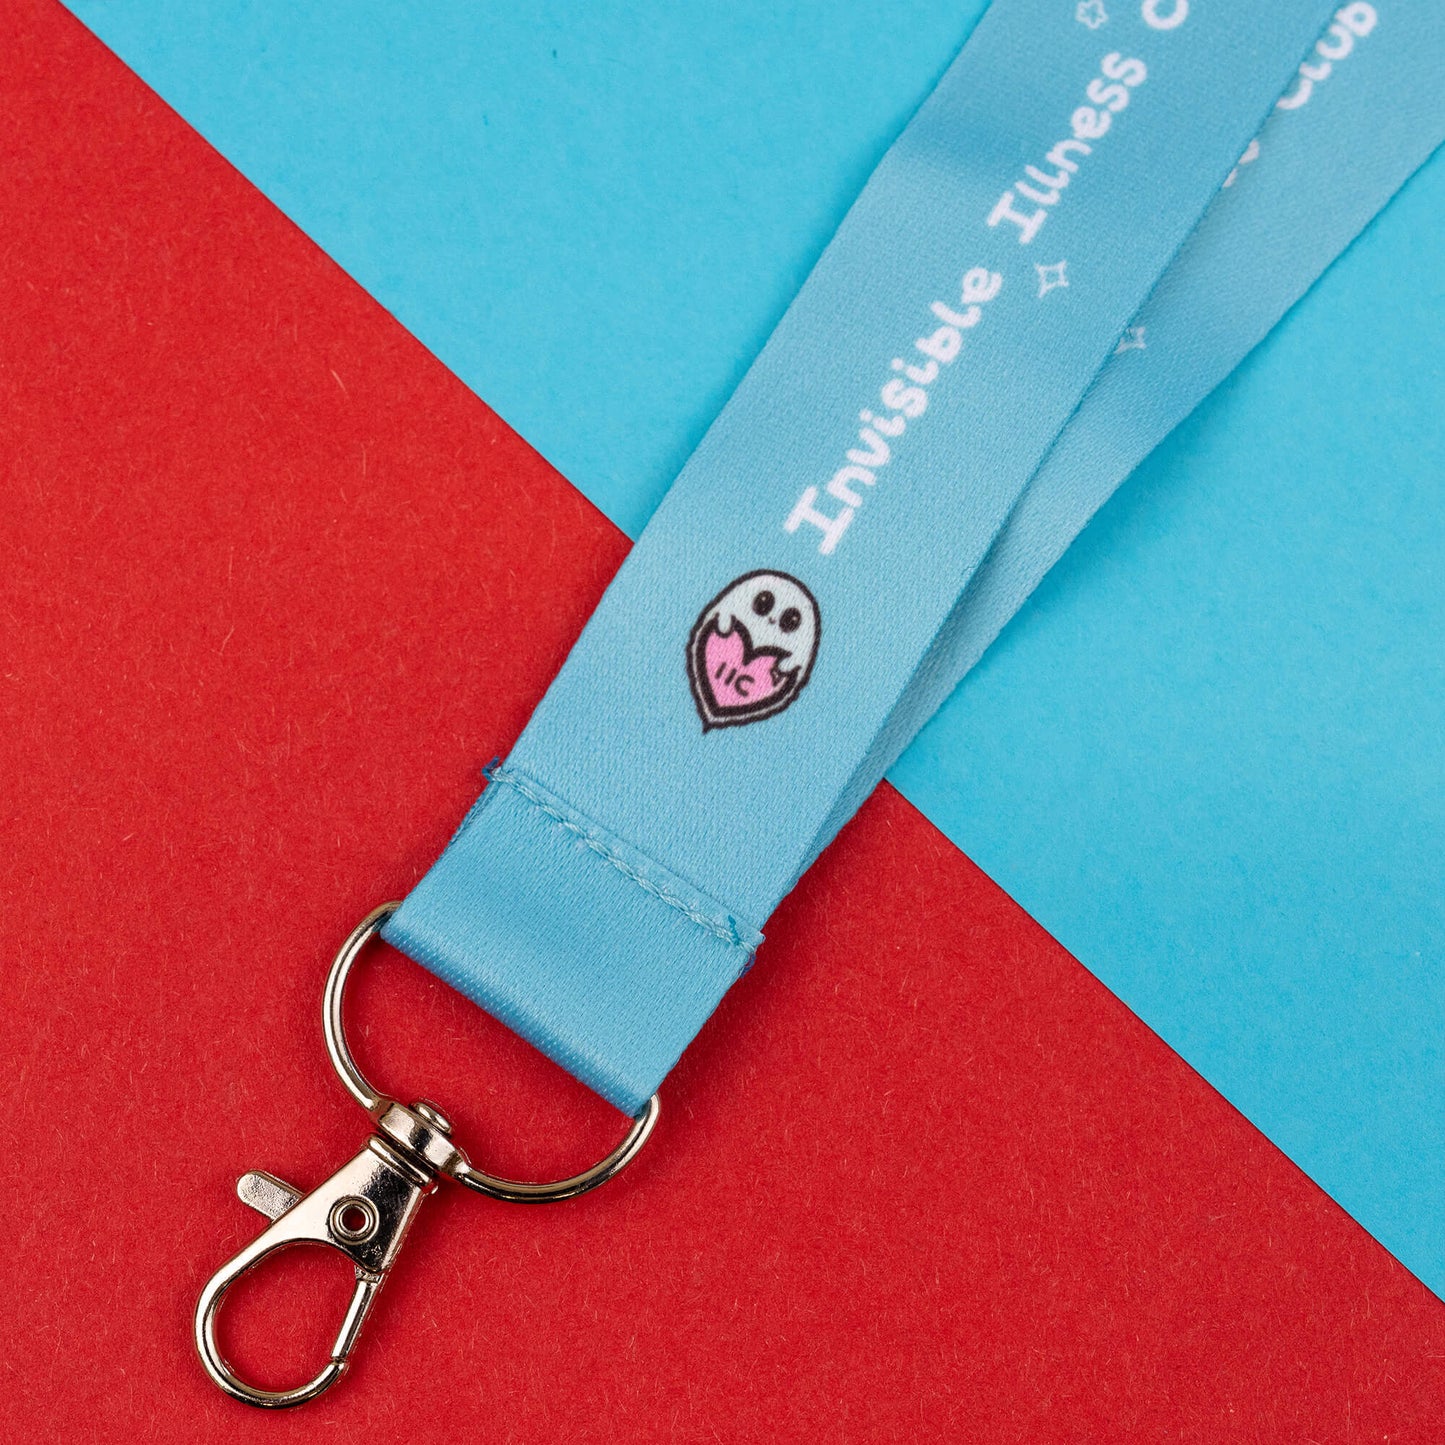 Close-up of a lanyard designed to raise awareness for invisible illnesses. The light blue lanyard features the text 'Invisible Illness Club' and a cute logo of a ghost with a heart. It has a metal clasp and is laid out on a red and blue geometric background.